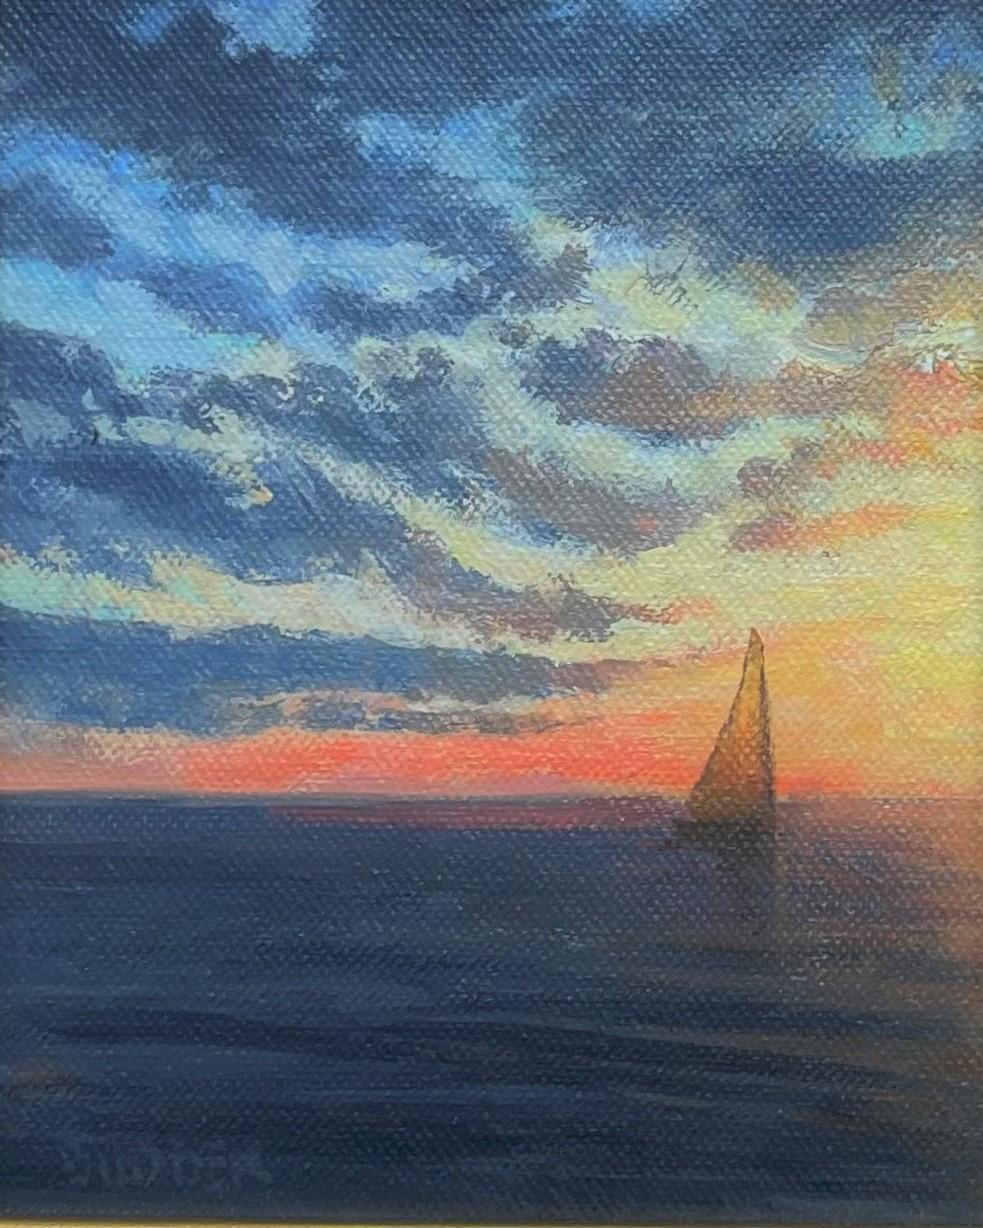 Impressionistic Seascape Painting Michael Budden Morning Sun For Sale 2